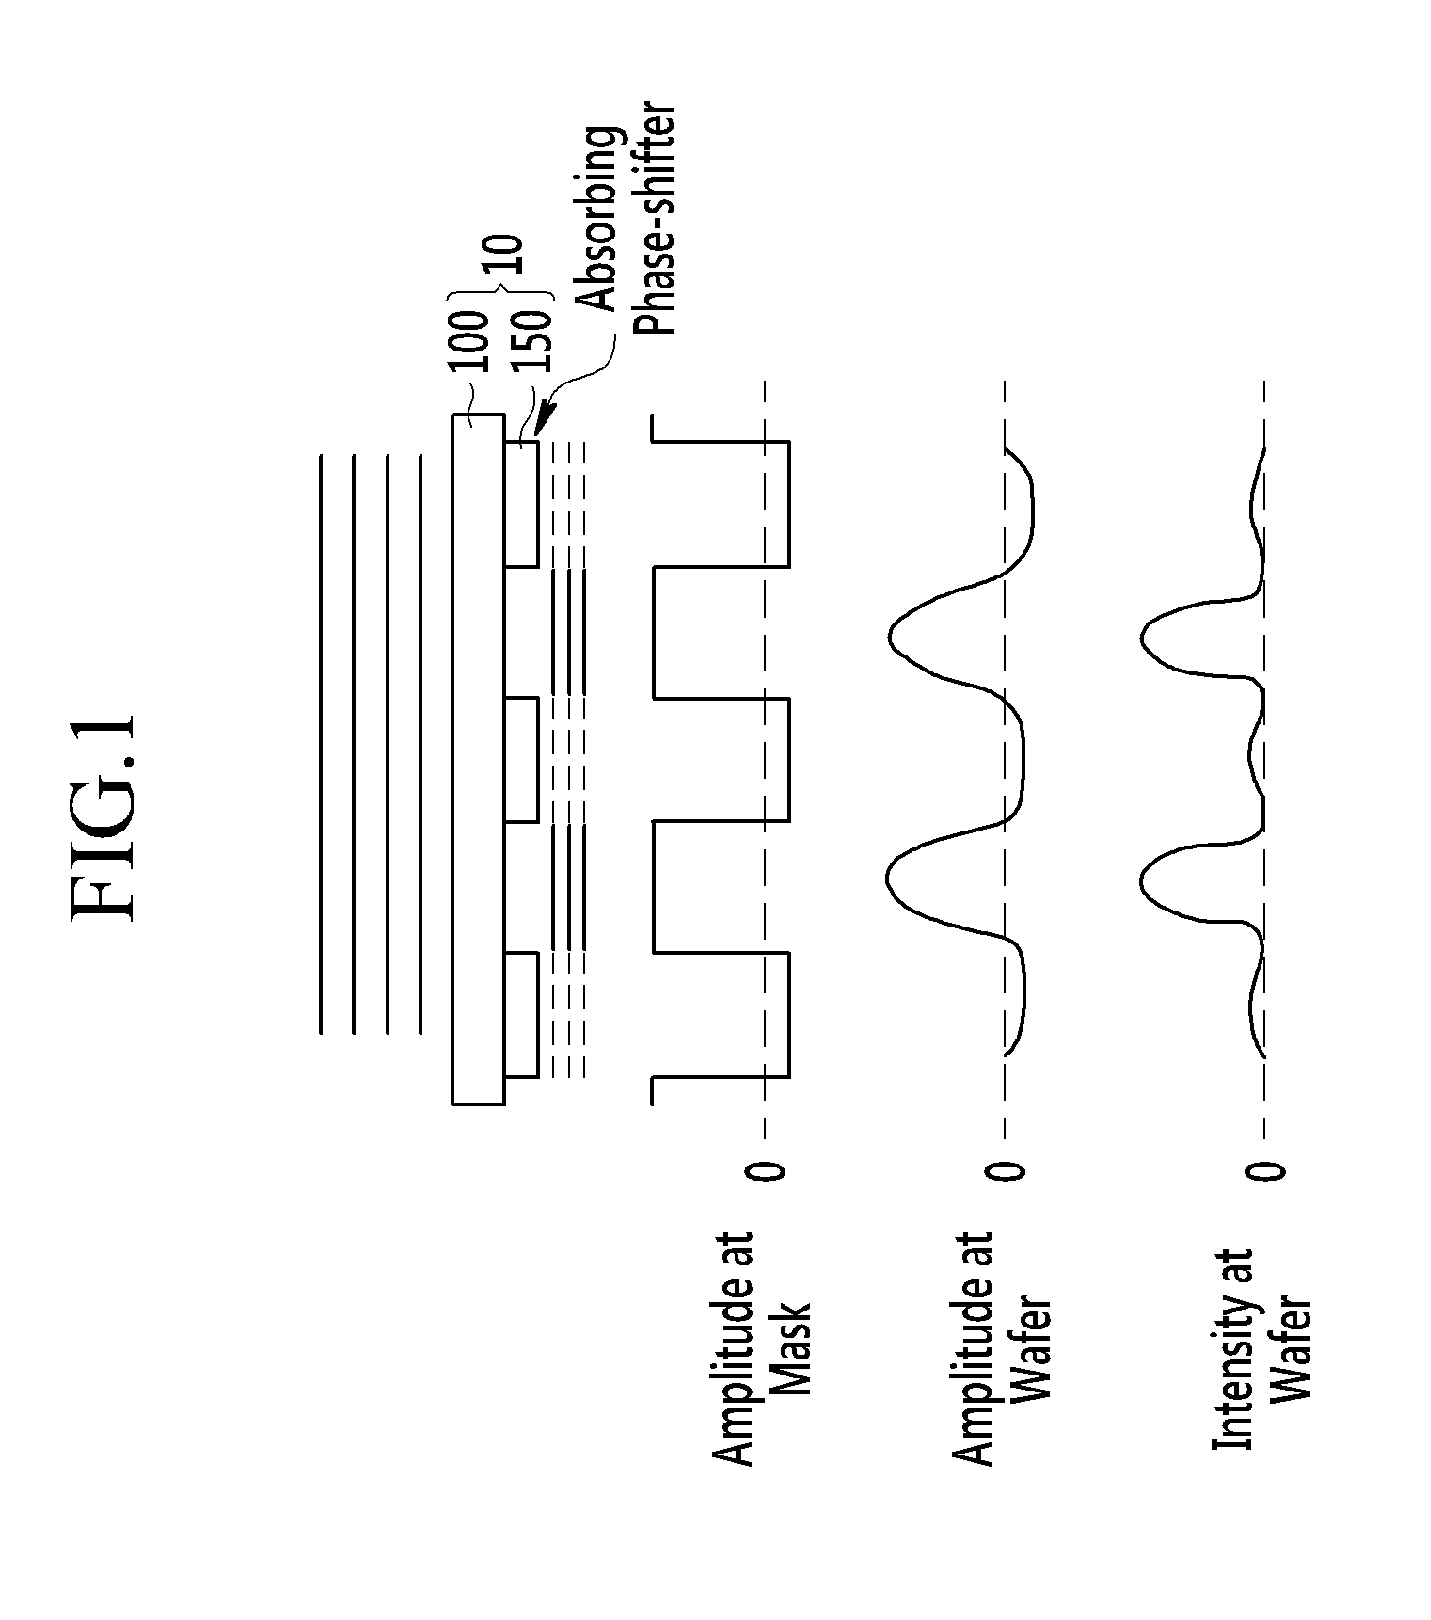 Mask for exposure and method of fabricating substrate using said mask